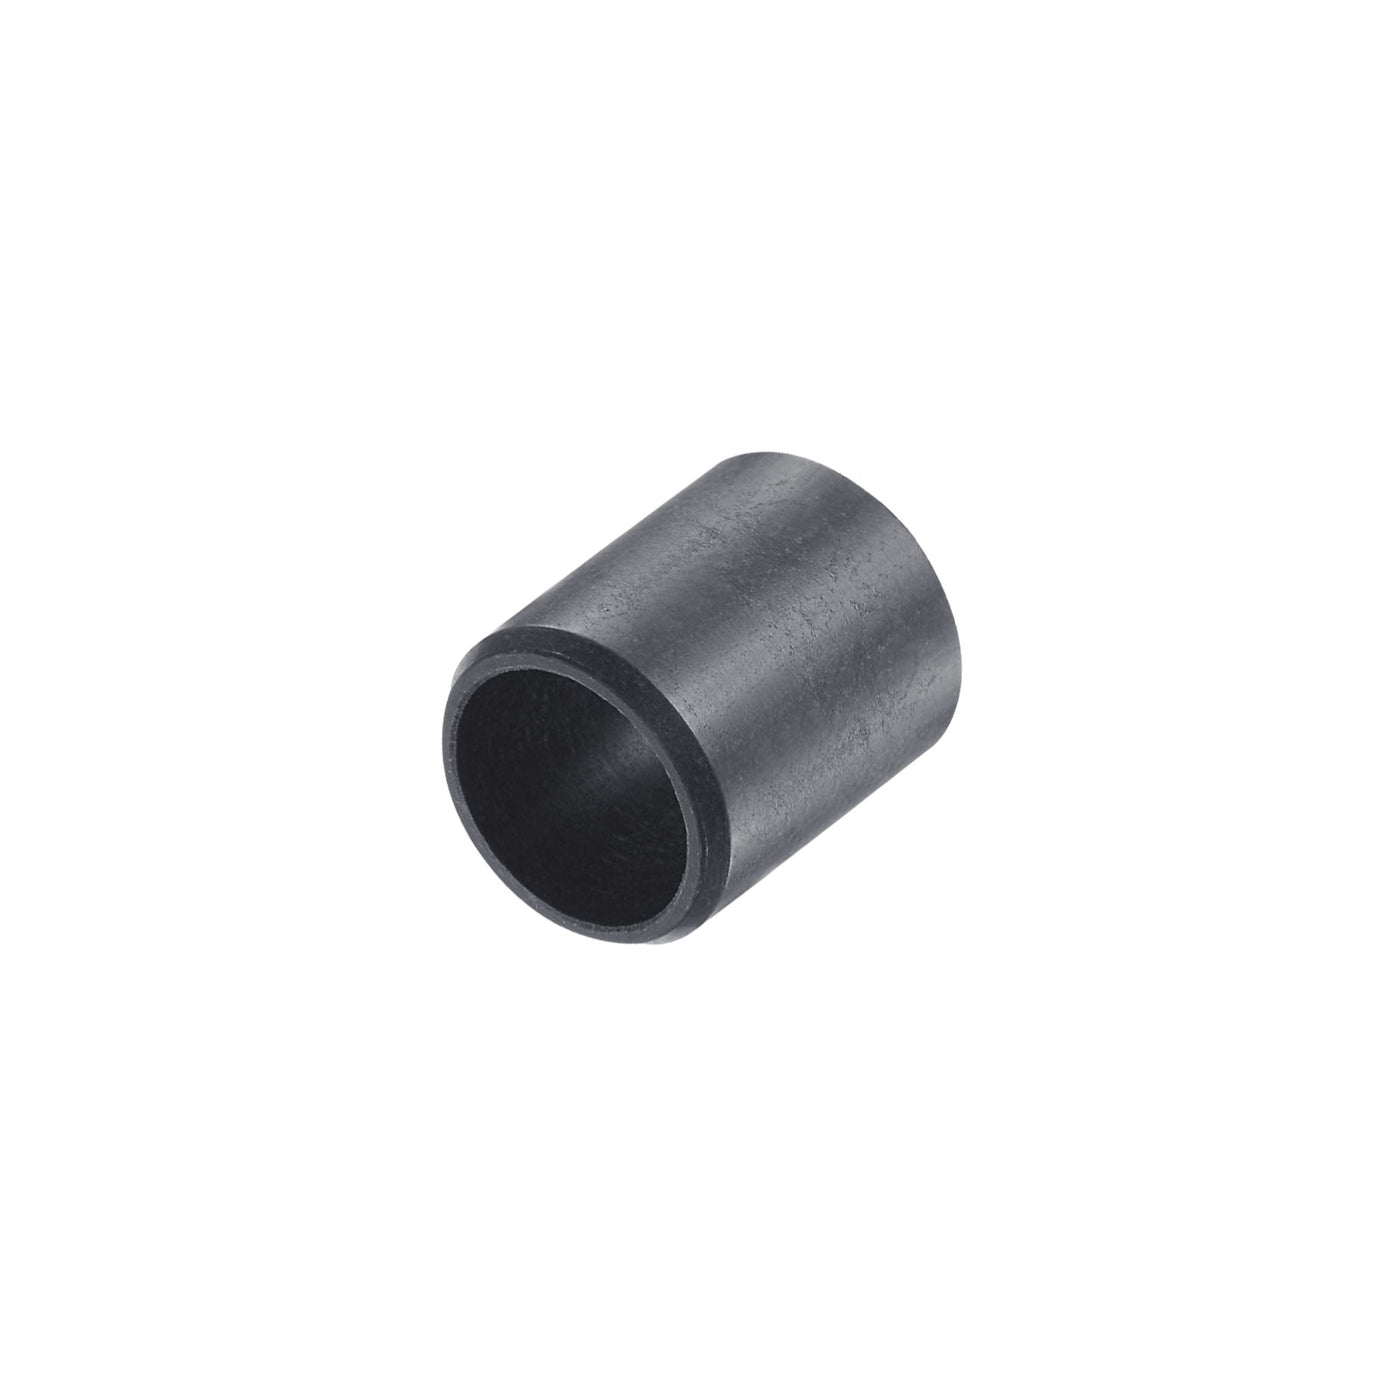 uxcell Uxcell Sleeve Bearings 8mmx10mmx12mm POM Wrapped Oilless Bushings Black